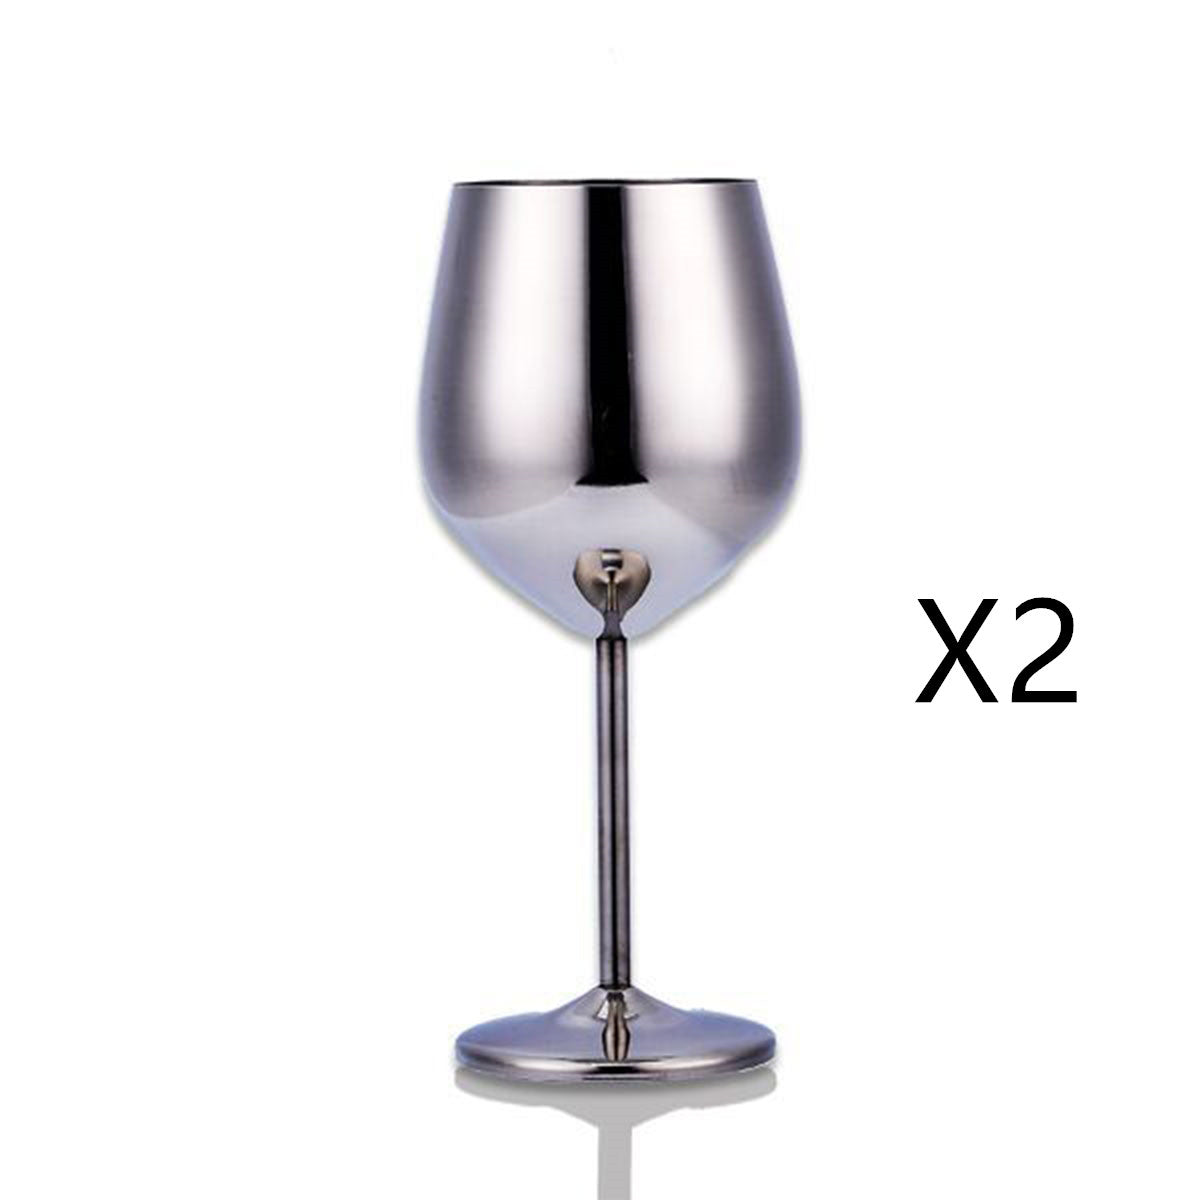 Stainless steel exclusive glass